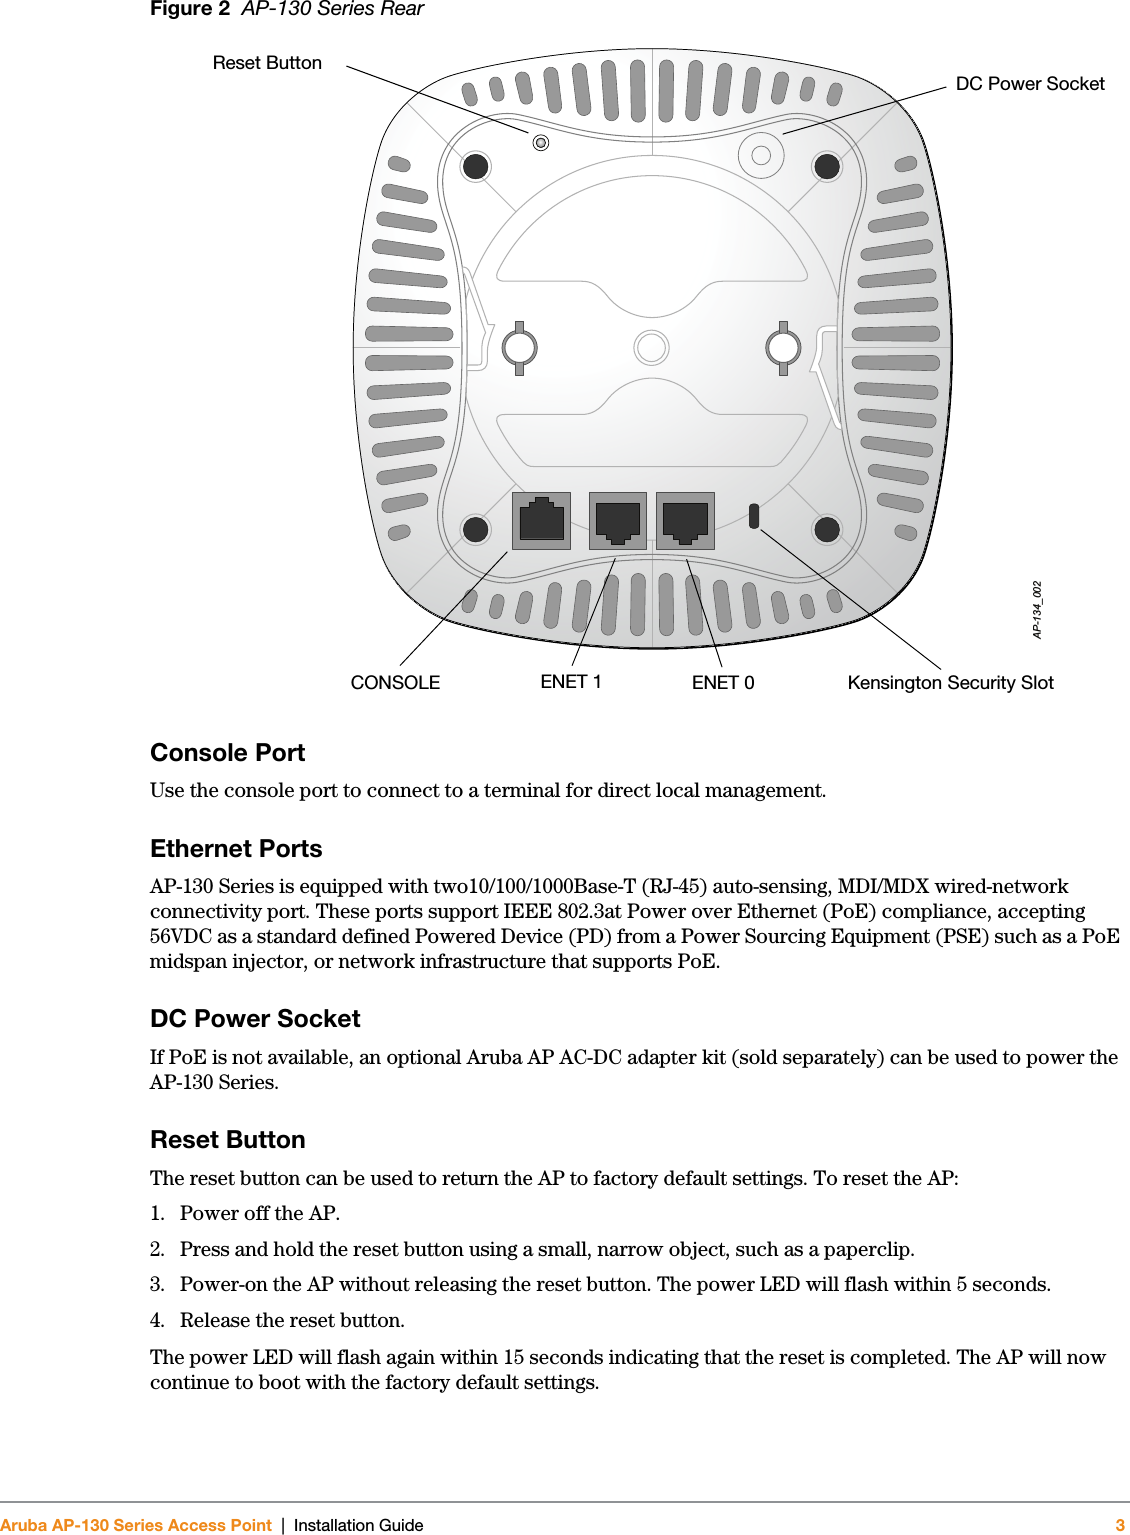 Aruba AP-130 Series Access Point | Installation Guide 3Figure 2  AP-130 Series Rear Console PortUse the console port to connect to a terminal for direct local management.Ethernet PortsAP-130 Series is equipped with two10/100/1000Base-T (RJ-45) auto-sensing, MDI/MDX wired-network connectivity port. These ports support IEEE 802.3at Power over Ethernet (PoE) compliance, accepting 56VDC as a standard defined Powered Device (PD) from a Power Sourcing Equipment (PSE) such as a PoE midspan injector, or network infrastructure that supports PoE.DC Power SocketIf PoE is not available, an optional Aruba AP AC-DC adapter kit (sold separately) can be used to power the AP-130 Series. Reset ButtonThe reset button can be used to return the AP to factory default settings. To reset the AP:1. Power off the AP.2. Press and hold the reset button using a small, narrow object, such as a paperclip.3. Power-on the AP without releasing the reset button. The power LED will flash within 5 seconds.4. Release the reset button.The power LED will flash again within 15 seconds indicating that the reset is completed. The AP will now continue to boot with the factory default settings.AP-134_002CONSOLE ENET 1 ENET 0Reset Button DC Power SocketKensington Security Slot